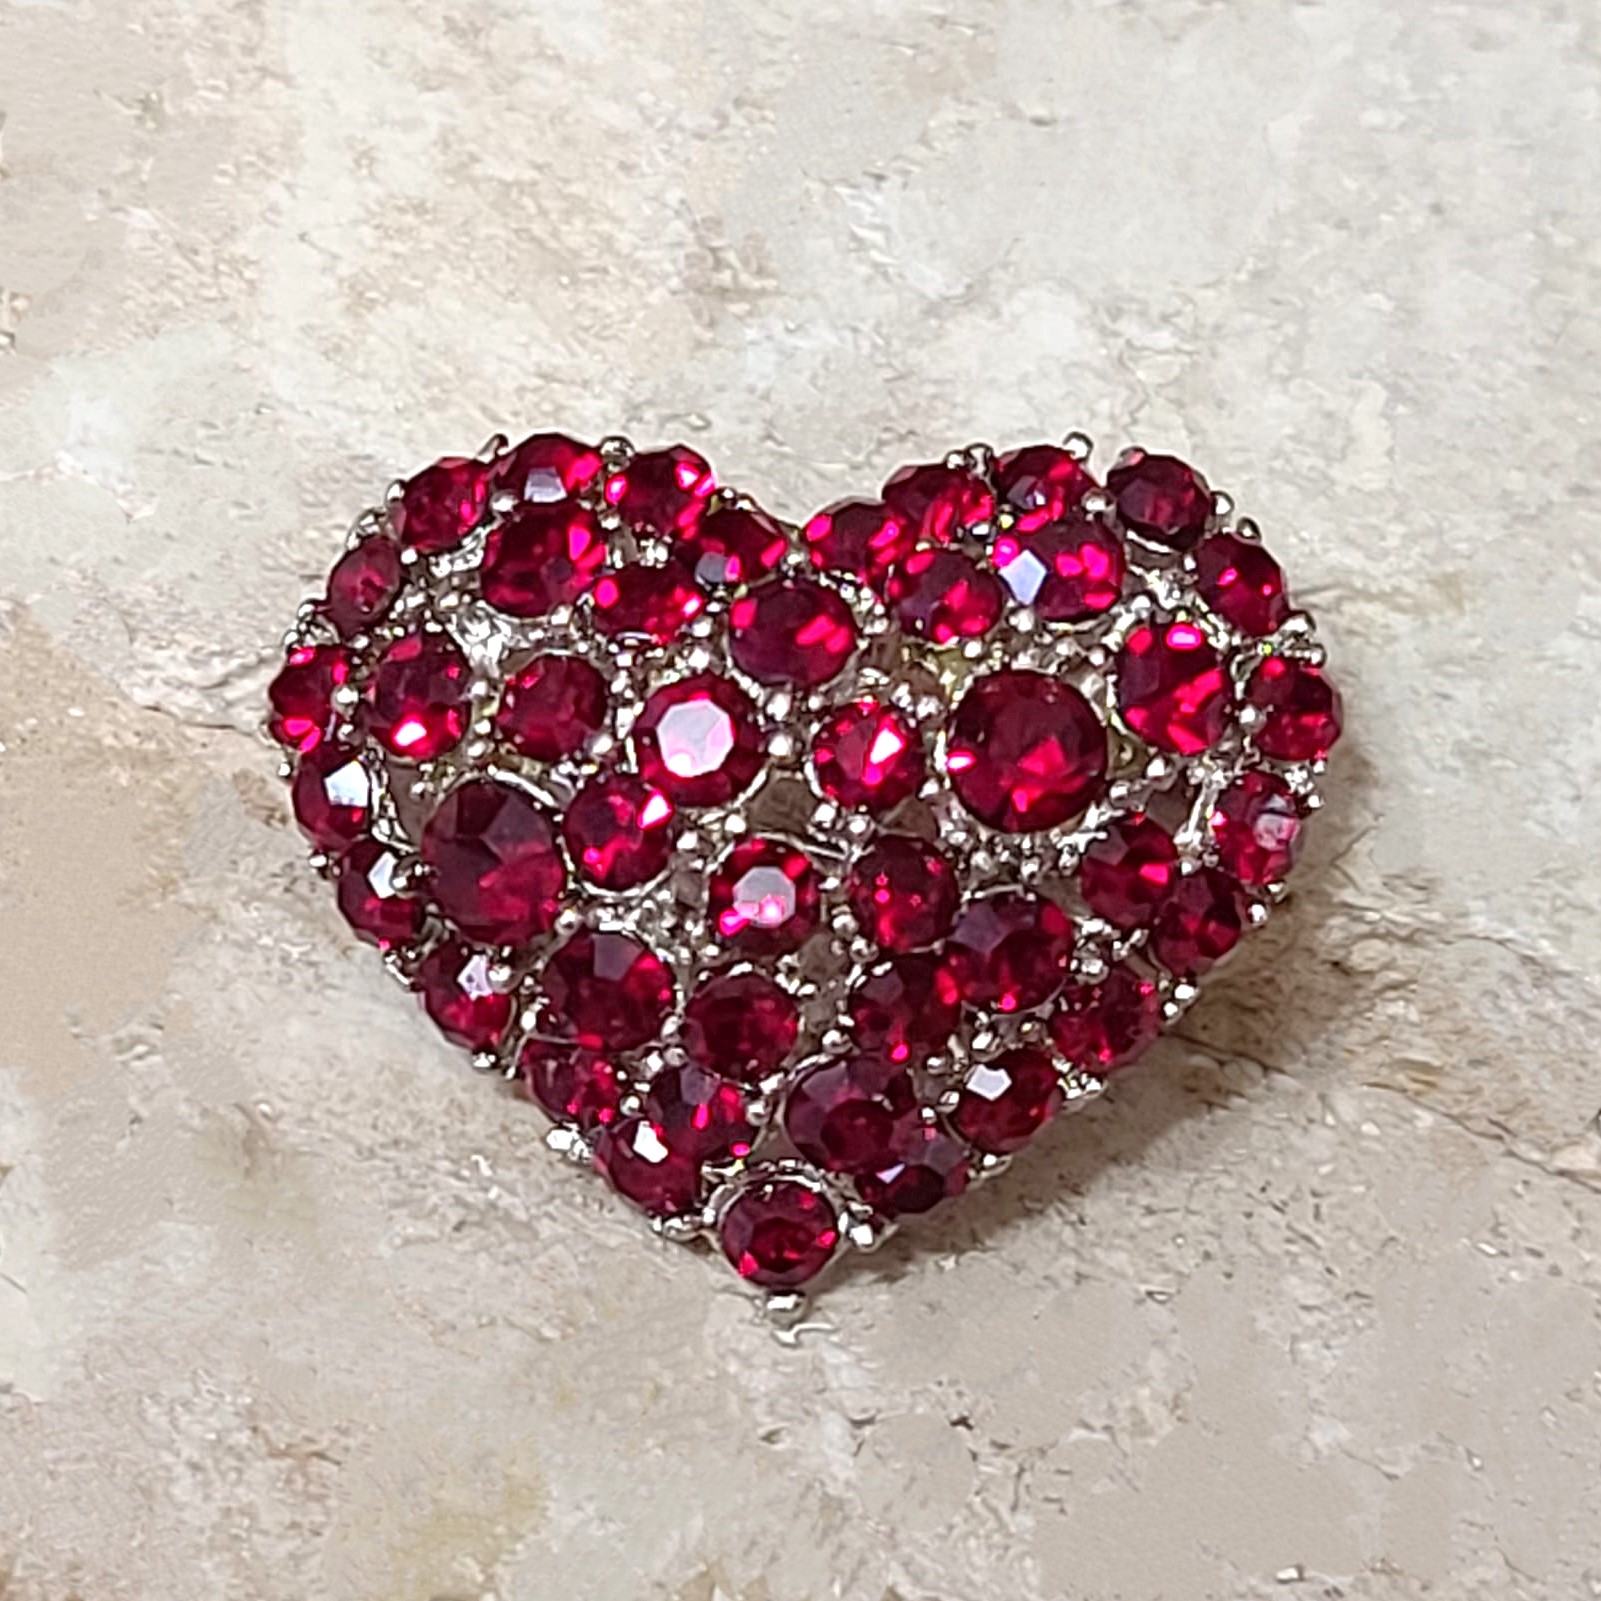 Heart brooch, red rhinestone pave style setting heart